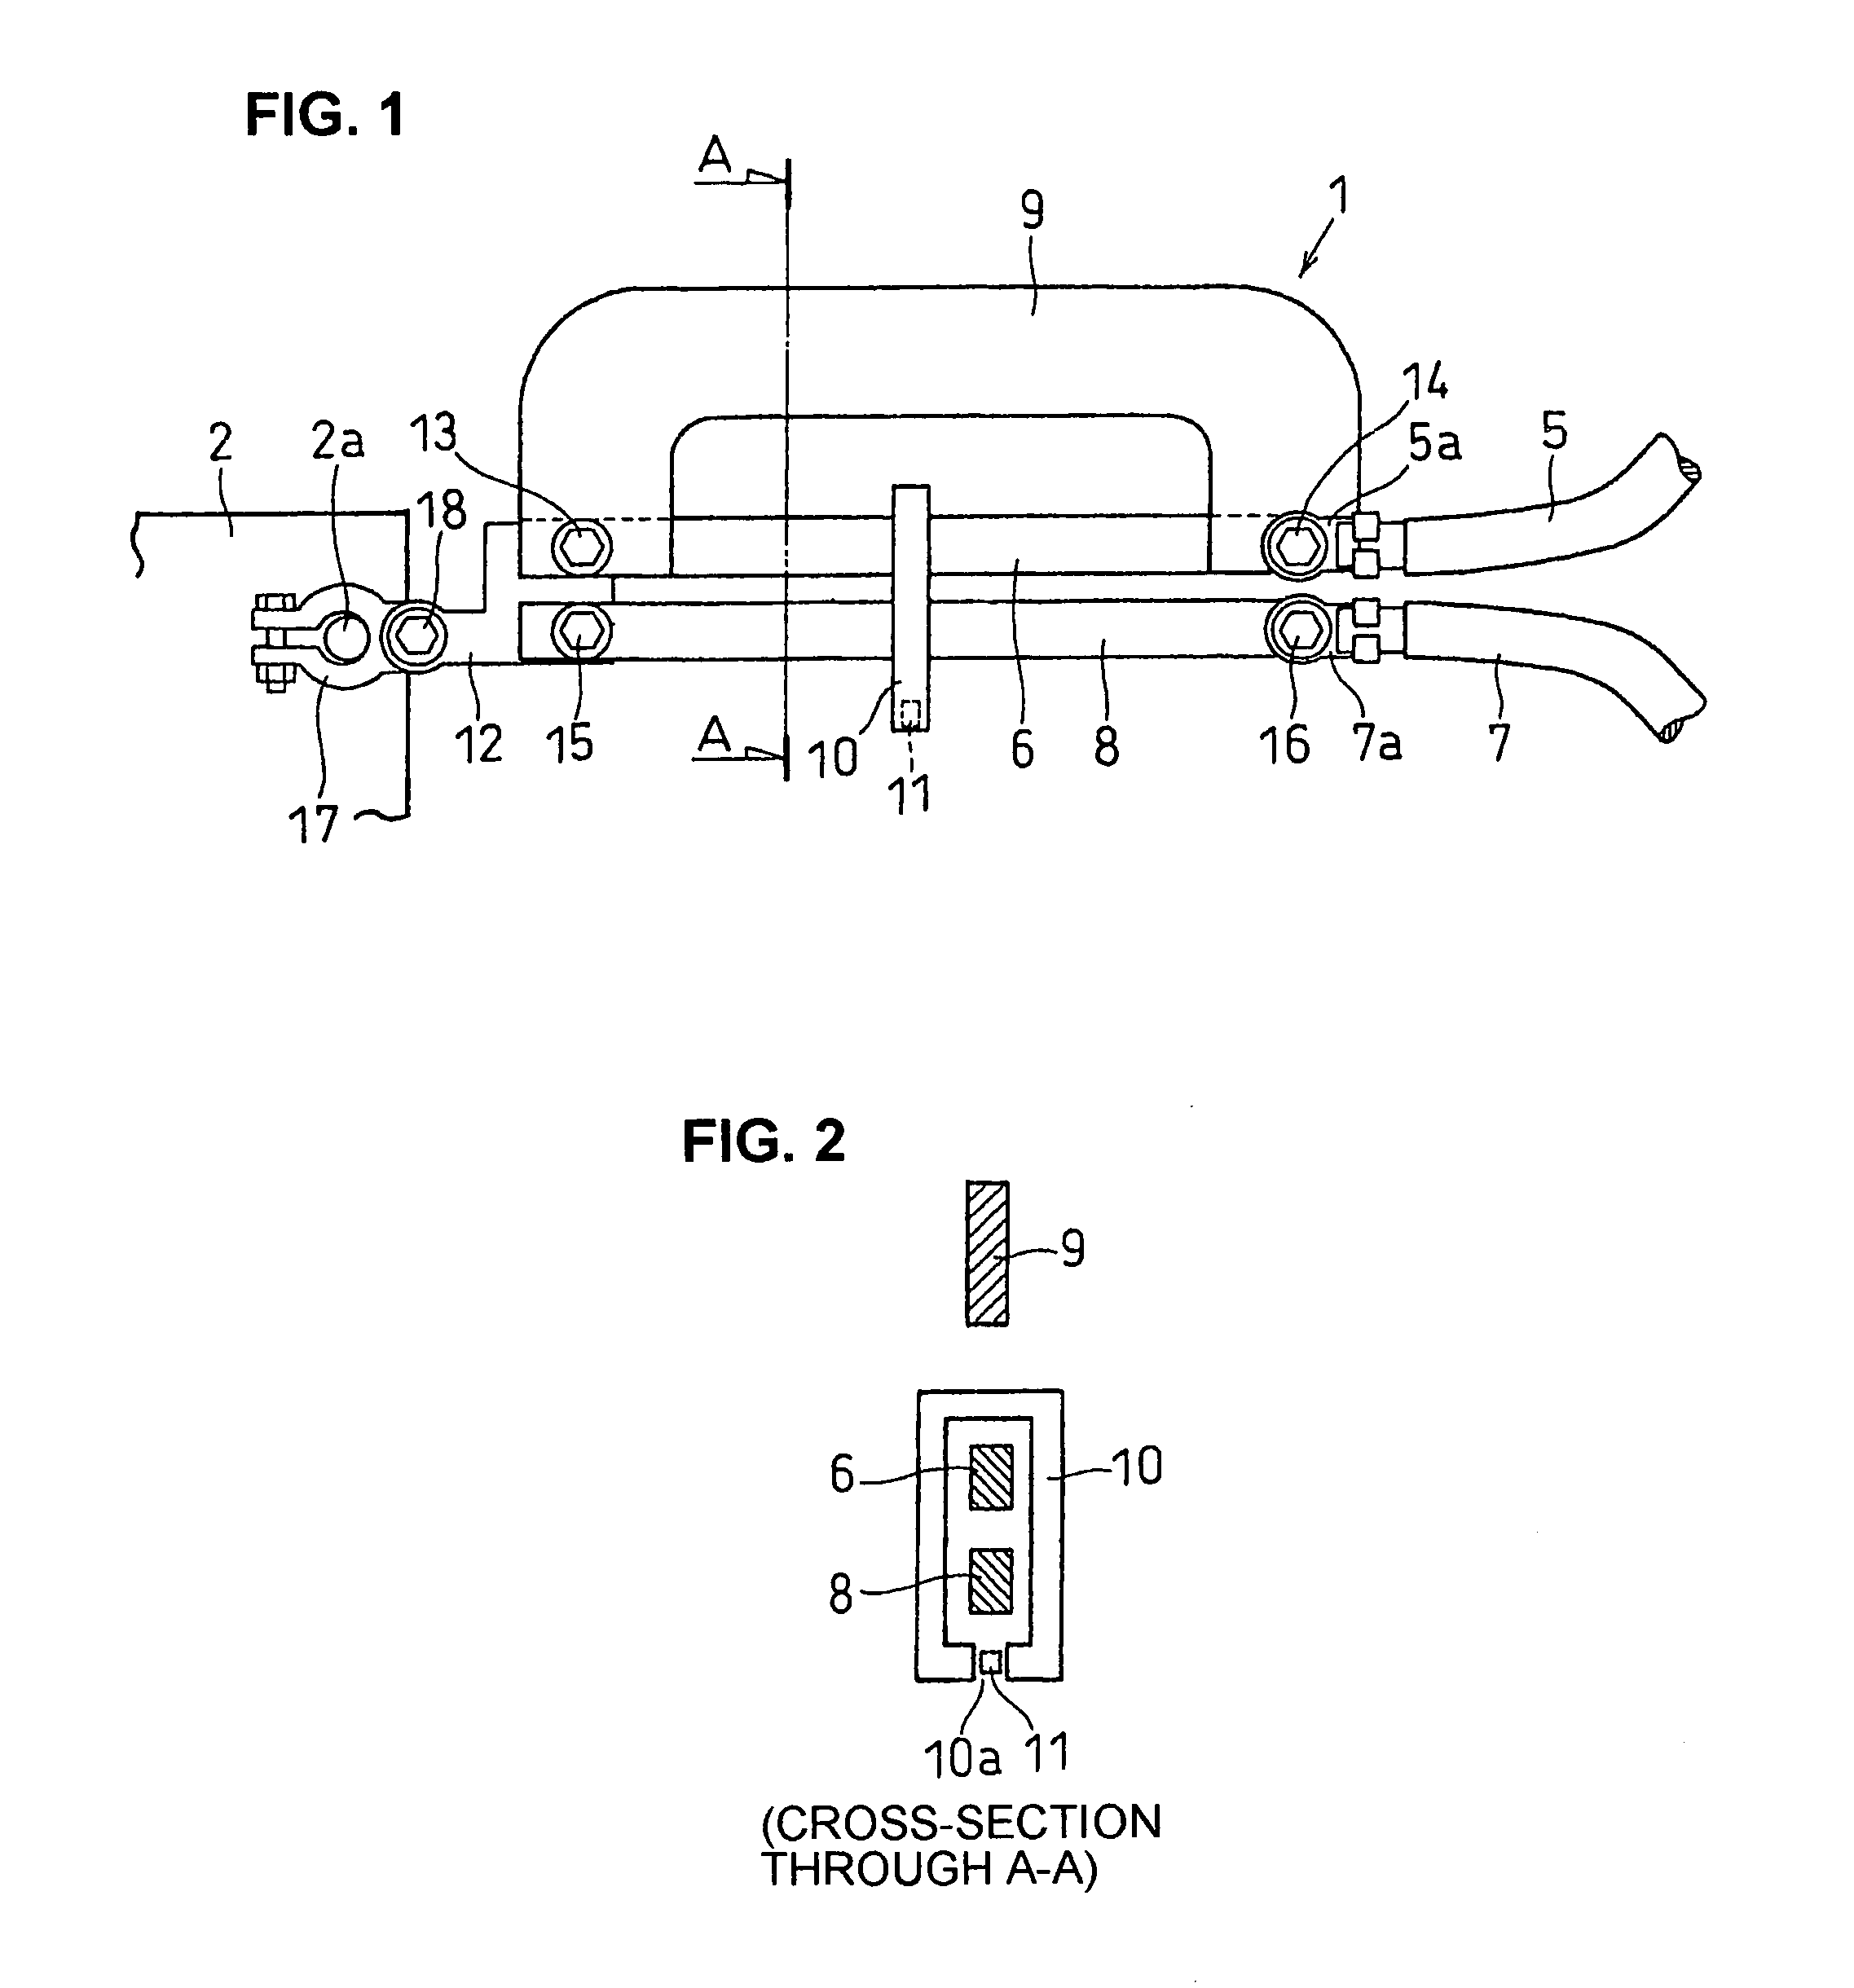 Electric current detection apparatus